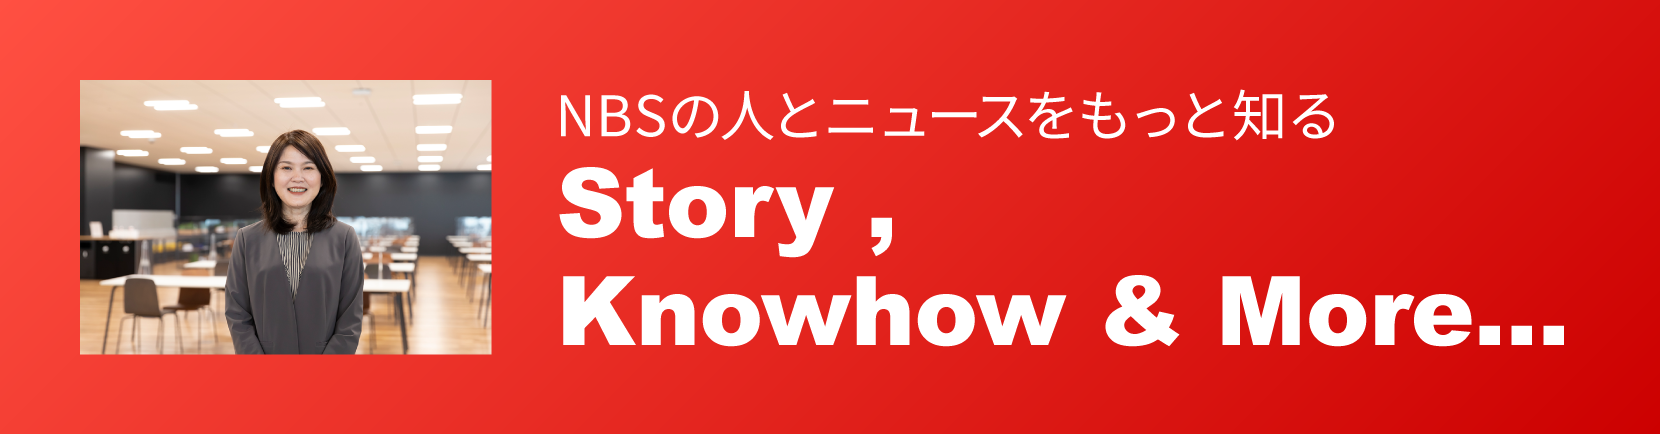 NBSの人とニュースをもっと知る Story, Knowhou & More...